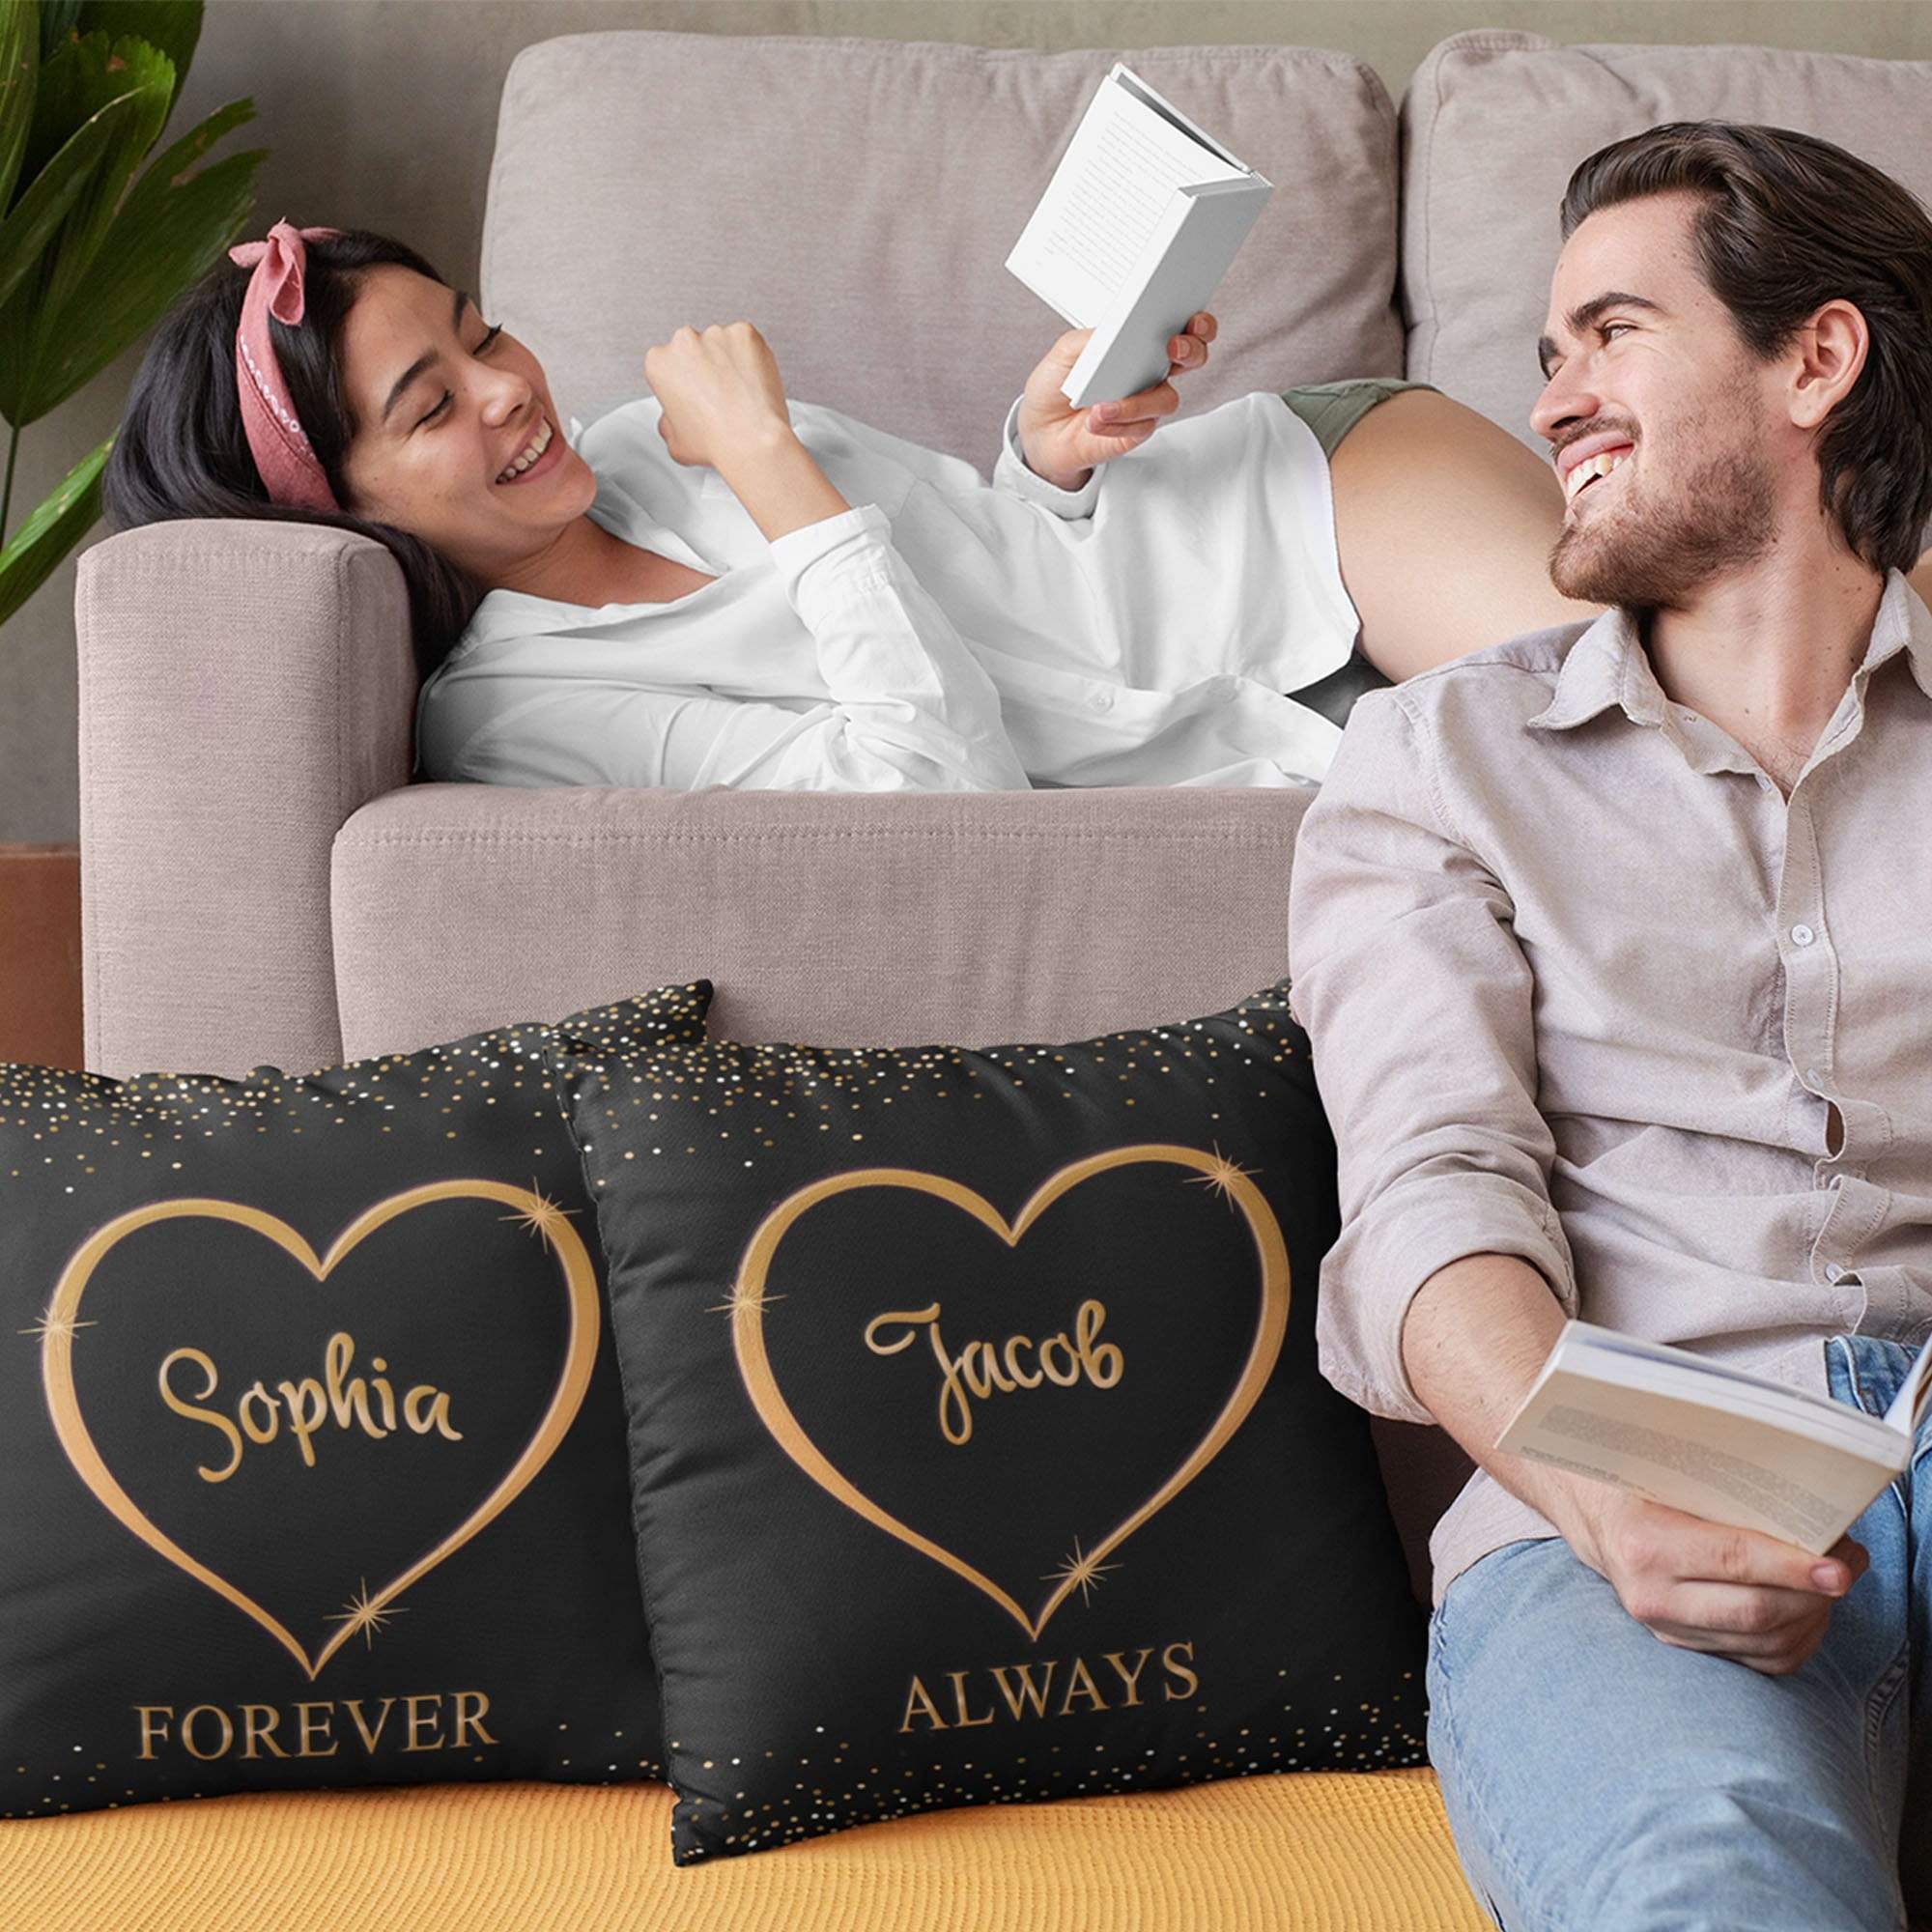 Couple Our Cuddling Pillow - Gift For Couple - Personalized Custom Pillow